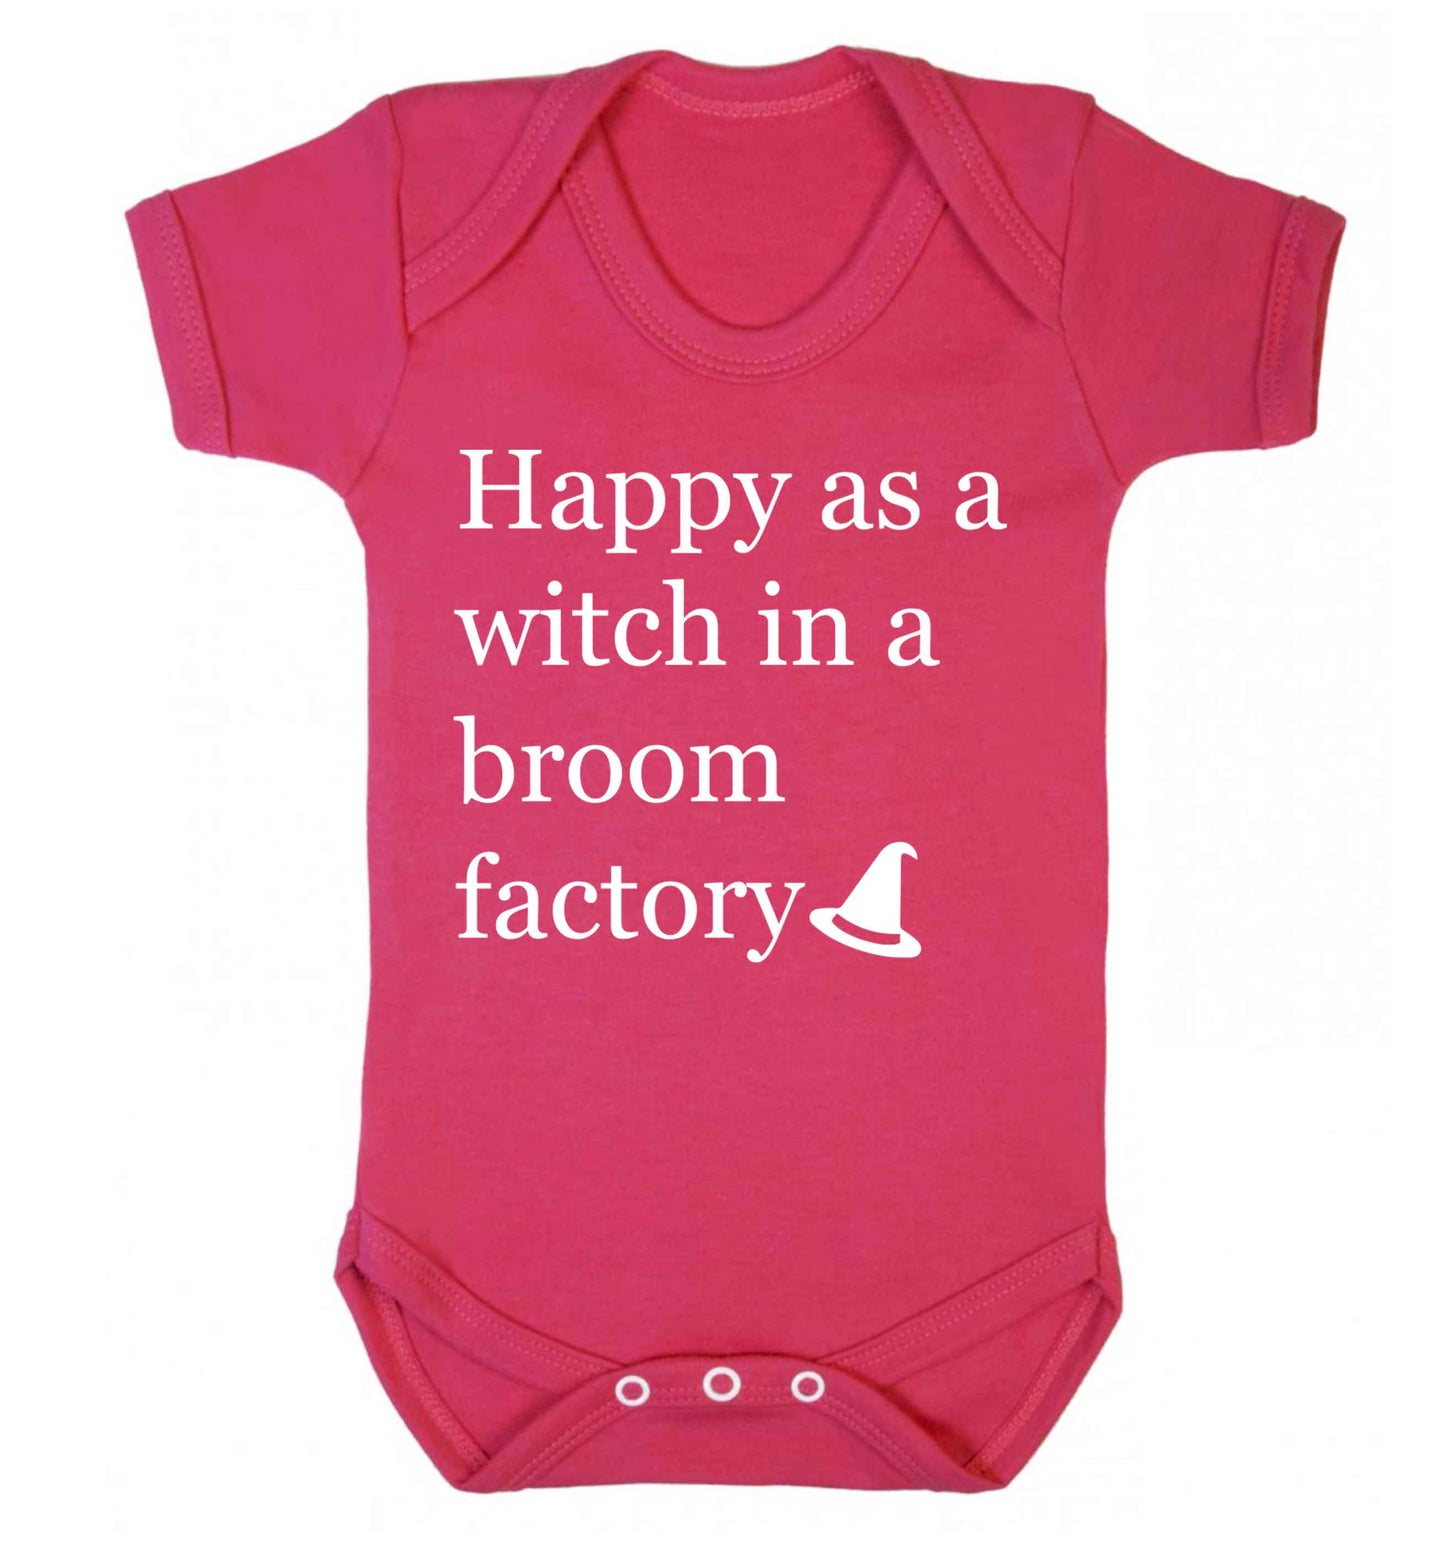 Happy as a witch in a broom factory Baby Vest dark pink 18-24 months